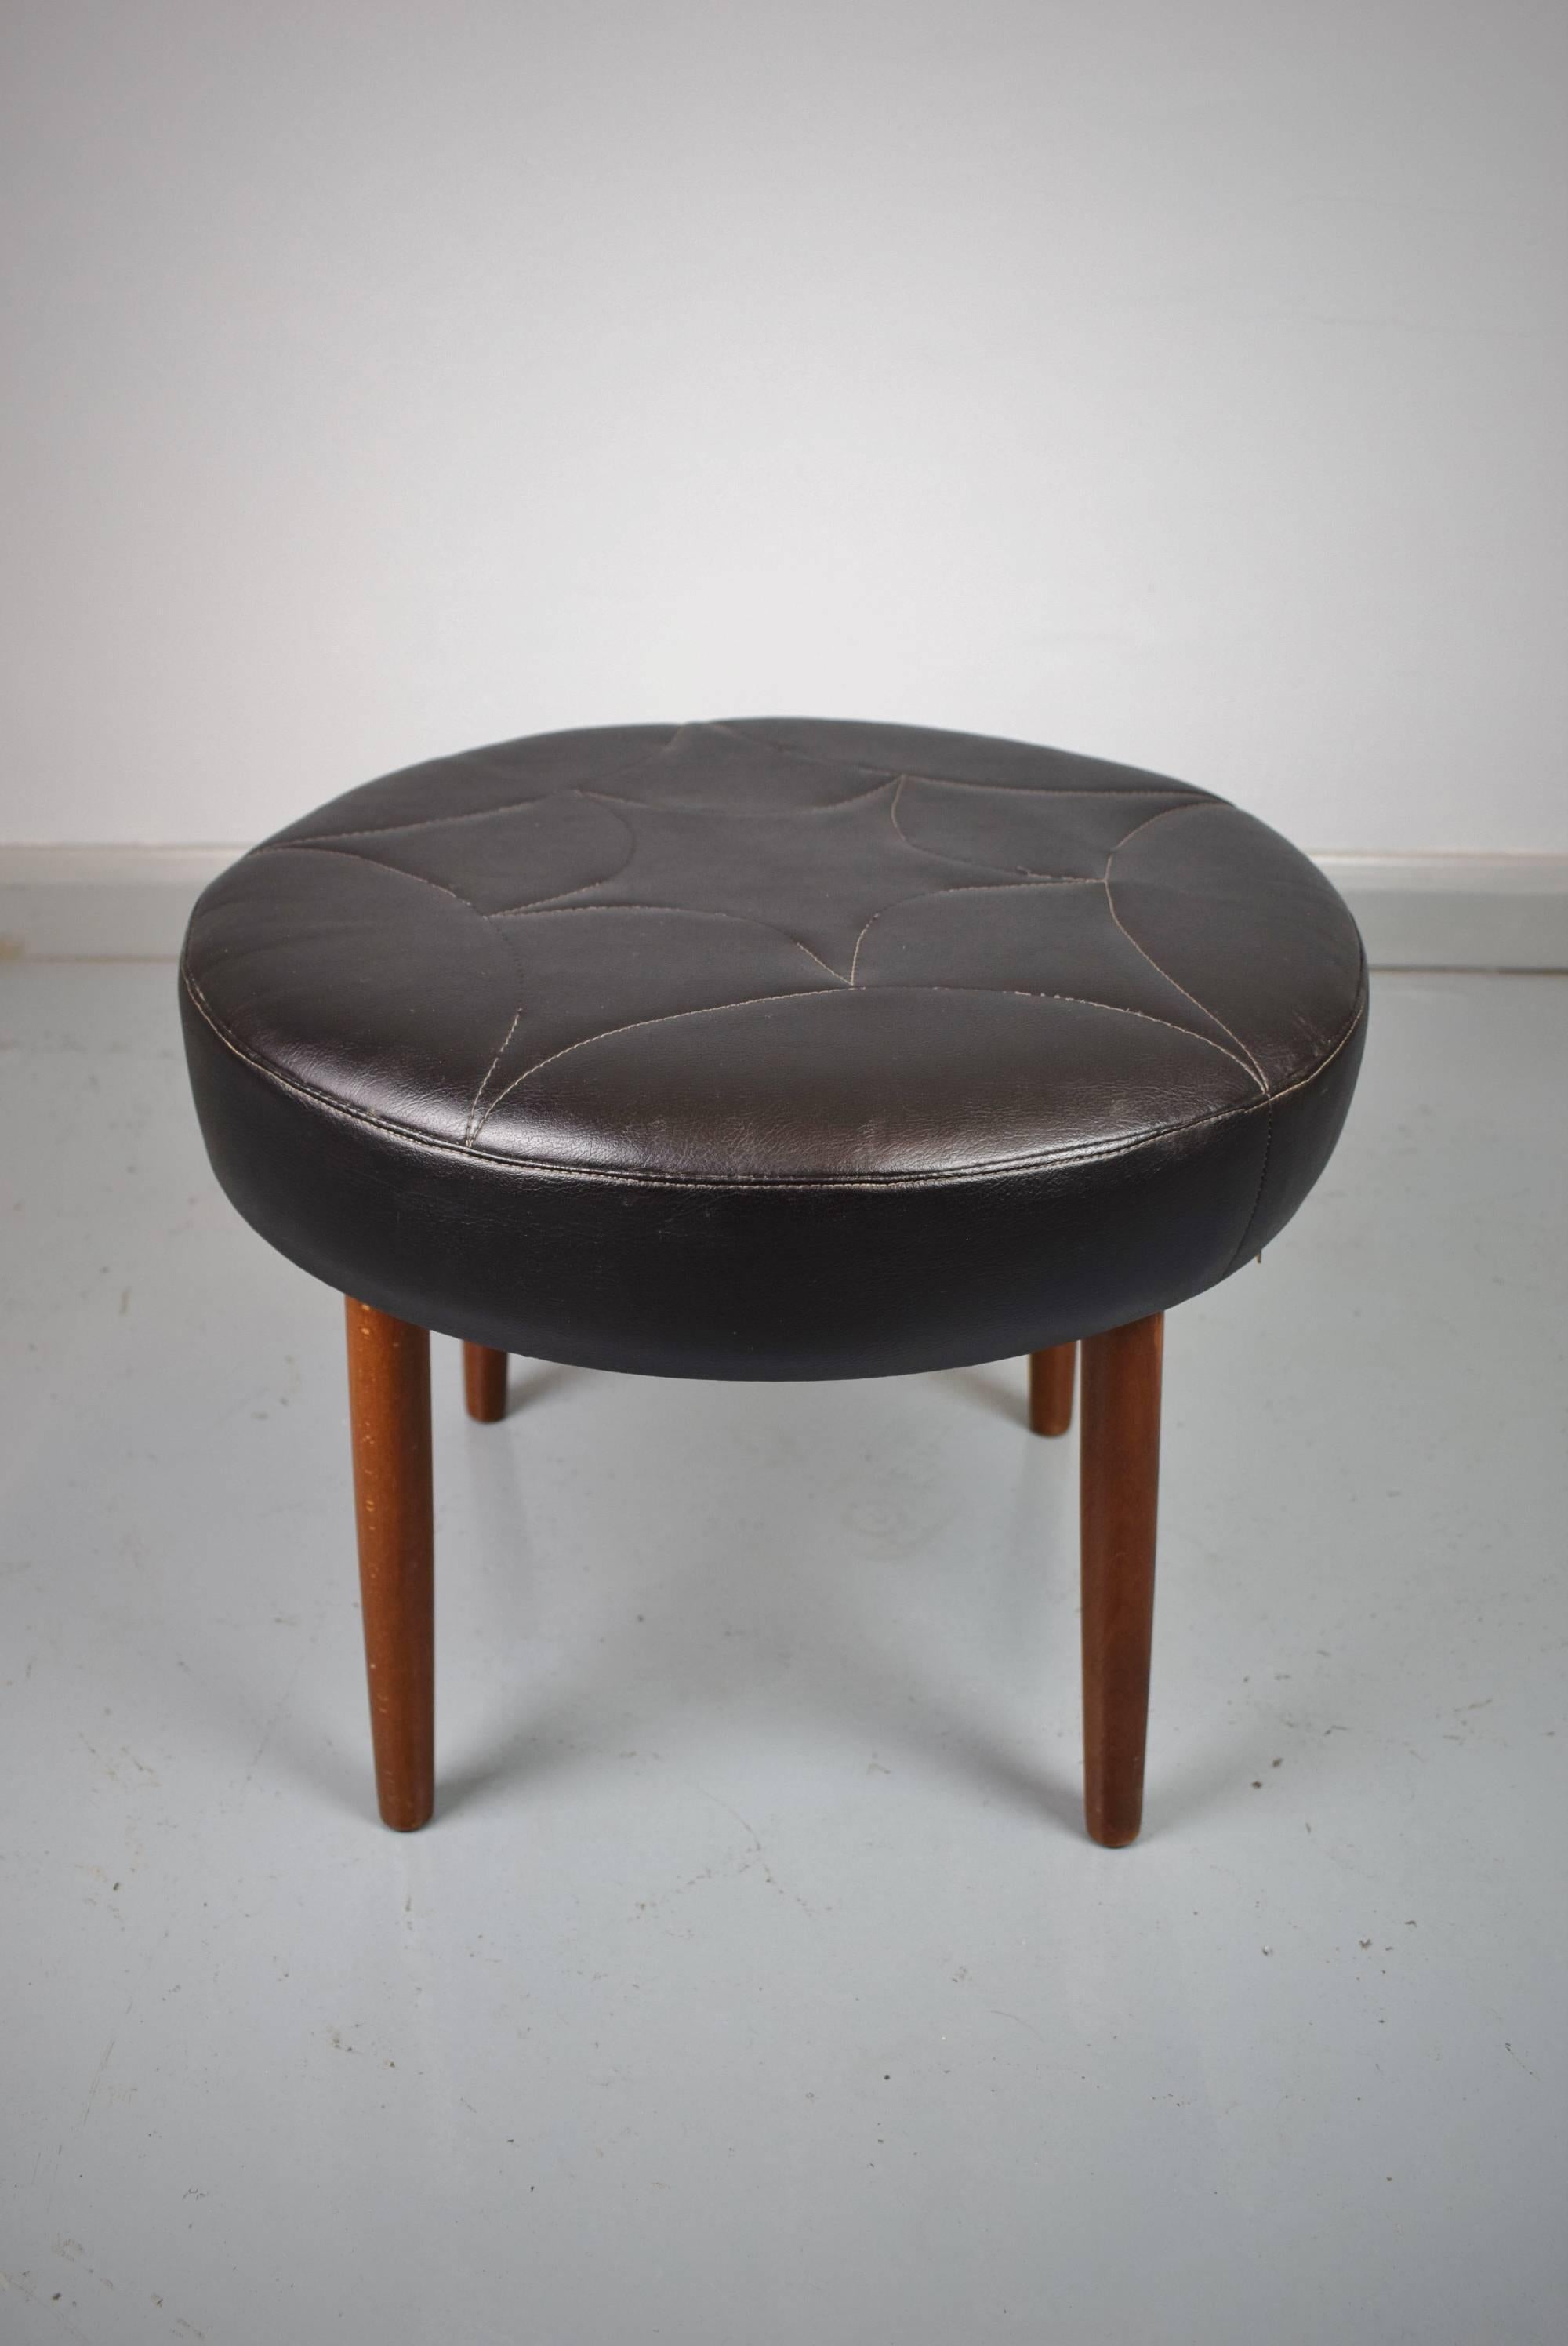 Designer: Danish Design

Manufacturer: Unknown

Country: Denmark

Date: 1960s

Material: Beech frame and legs with black leather upholstery

Maximum dimensions: Diameter 48cm and height 38cm

Condition: In excellent condition with only